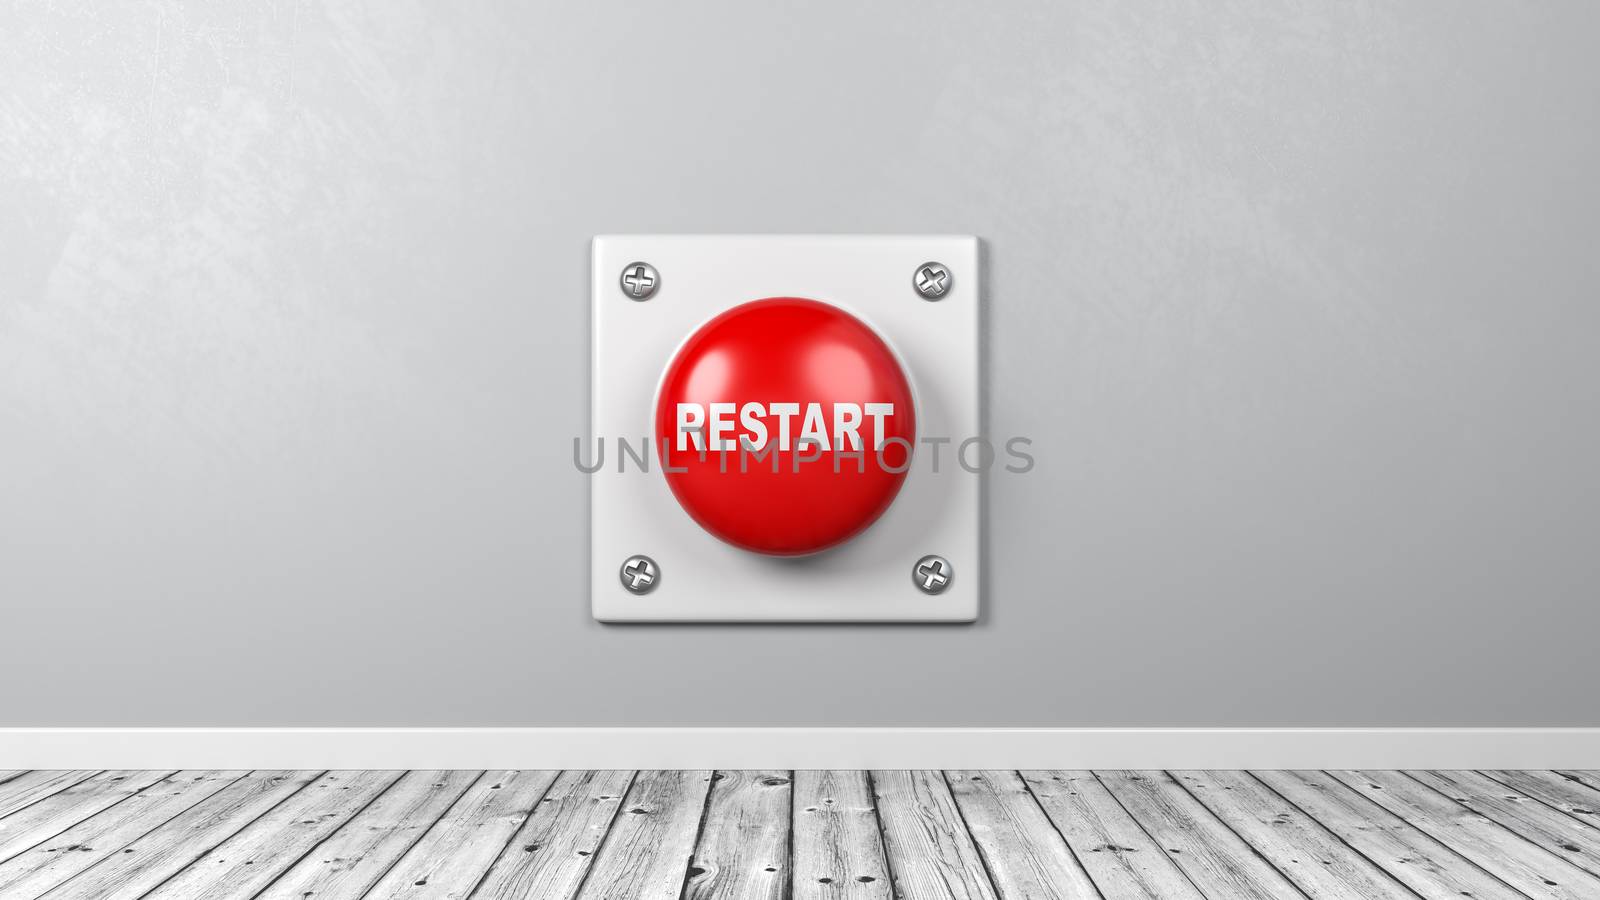 Red Button with Restart Text Against Gray Wall in the Room 3D Illustration